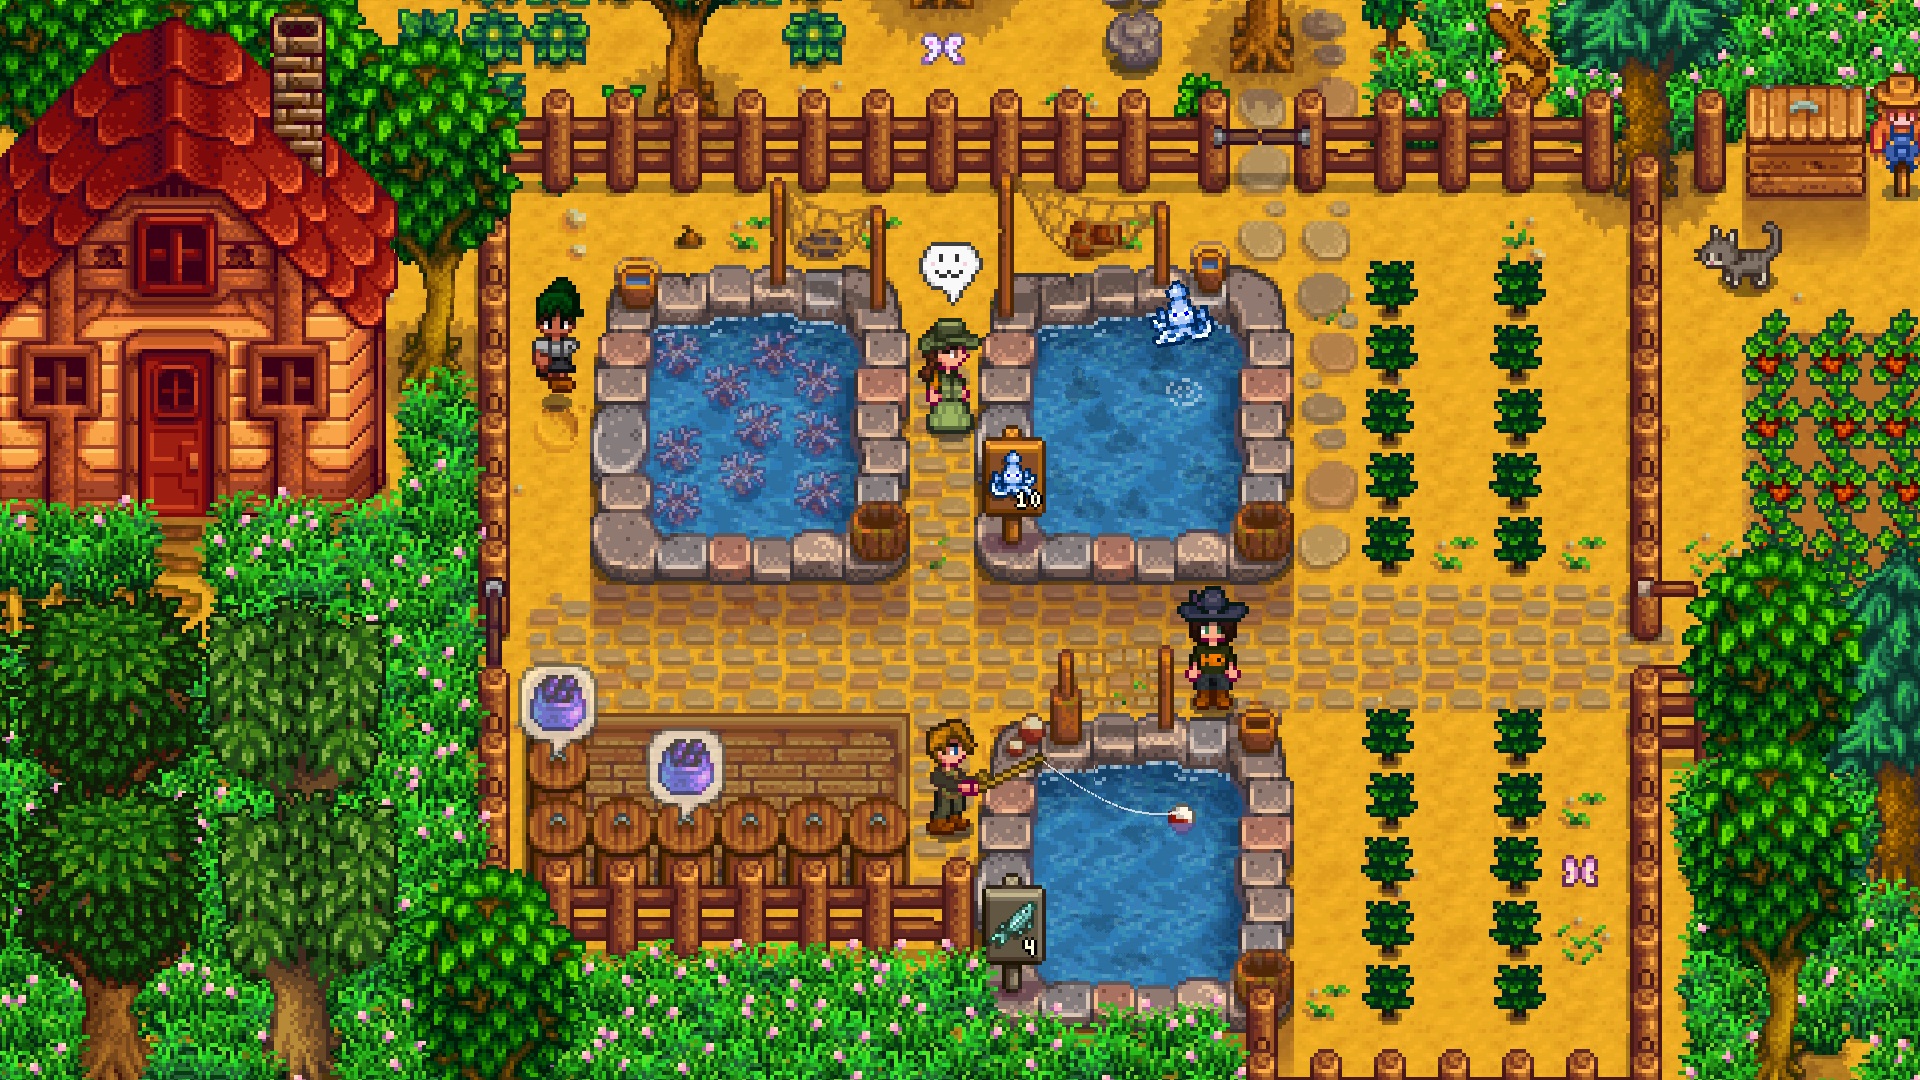 Another section of a farm in "Stardew Valley." This one shows a red-roofed shed, a copse of trees, and a trio of fish ponds that are being tended to by four farmers playing multiplayer. A few crops can be seen growing nearby.